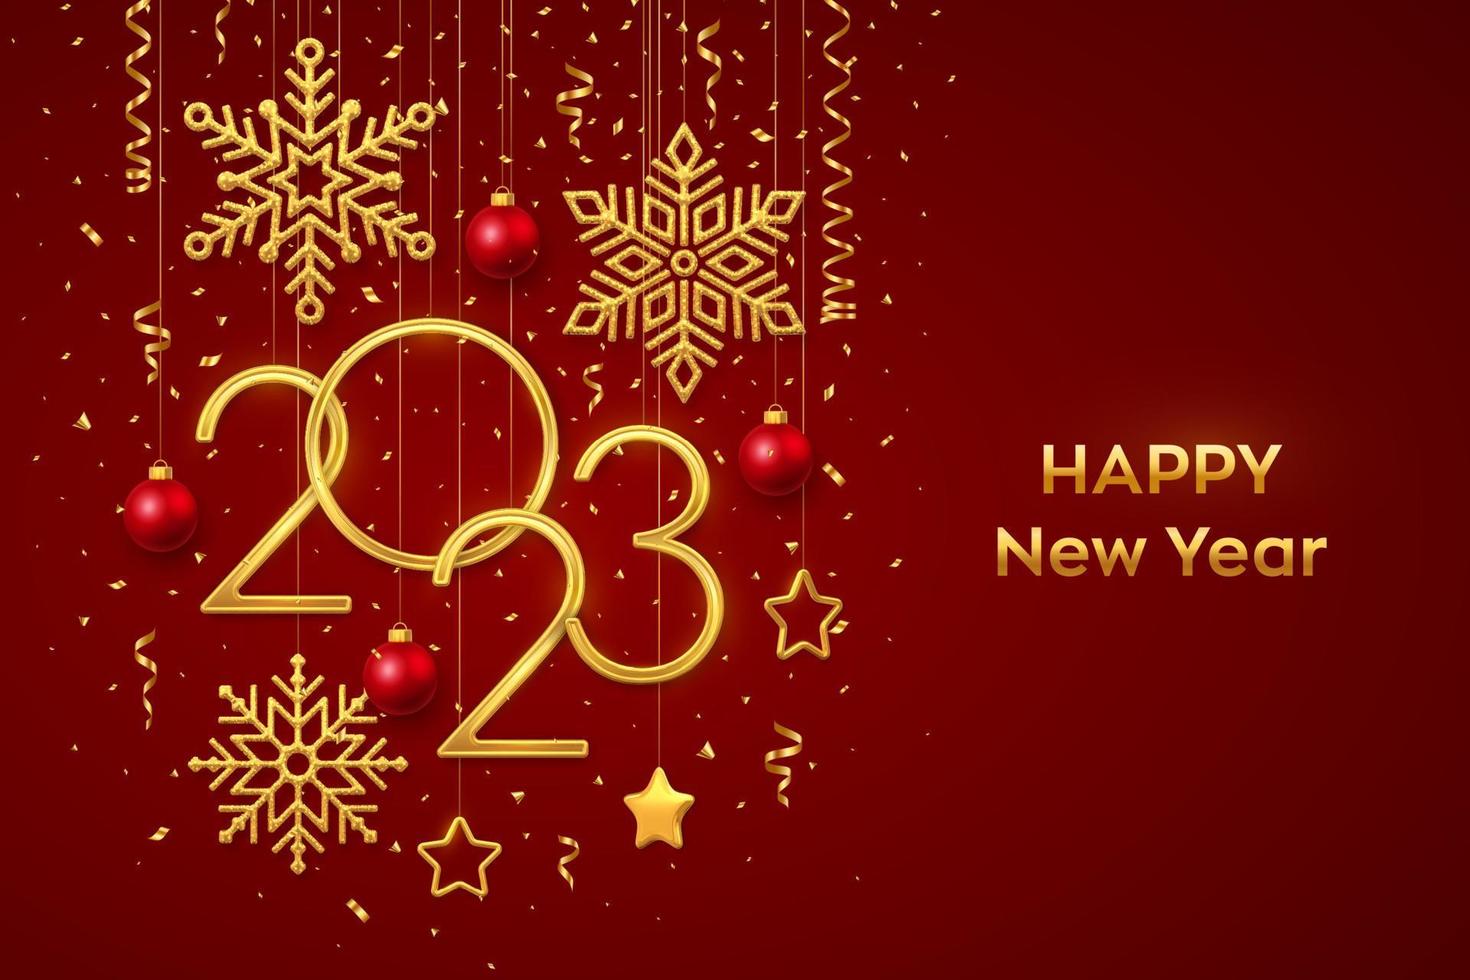 Happy New 2023 Year. Hanging Golden metallic numbers 2023 with shining snowflakes, 3D metallic stars, balls and confetti on red background. New Year greeting card or banner template. Vector. vector